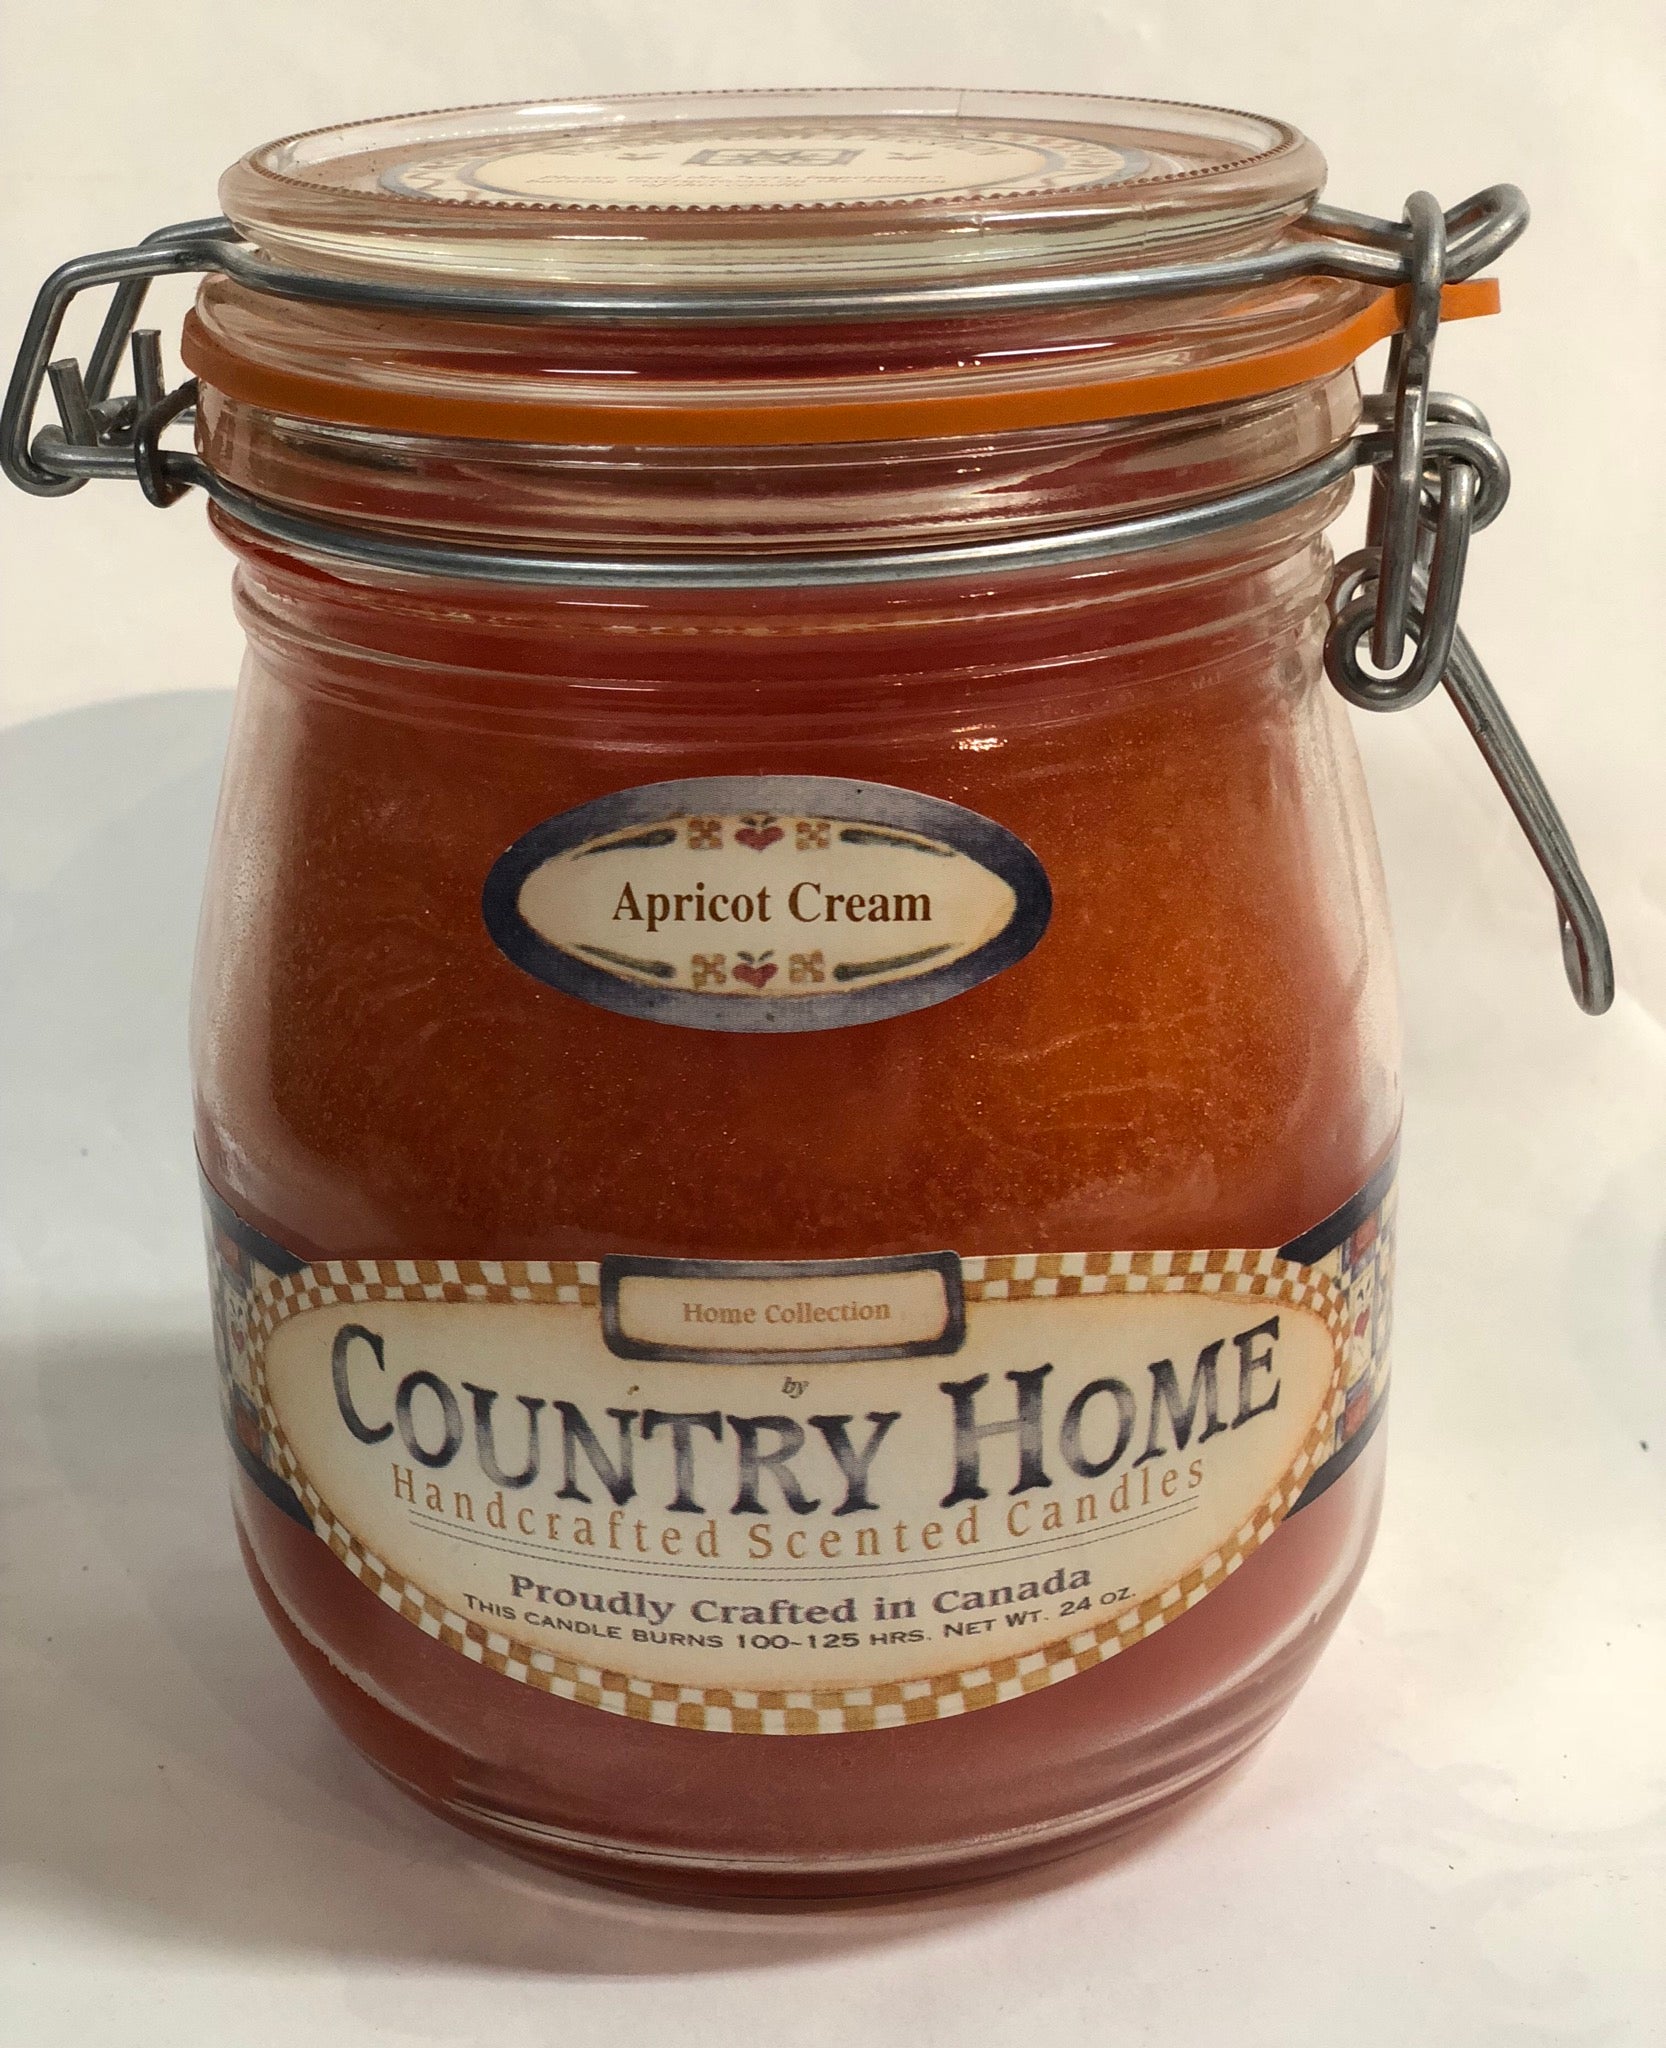 Country Home Jar Candle - Apricot Cream